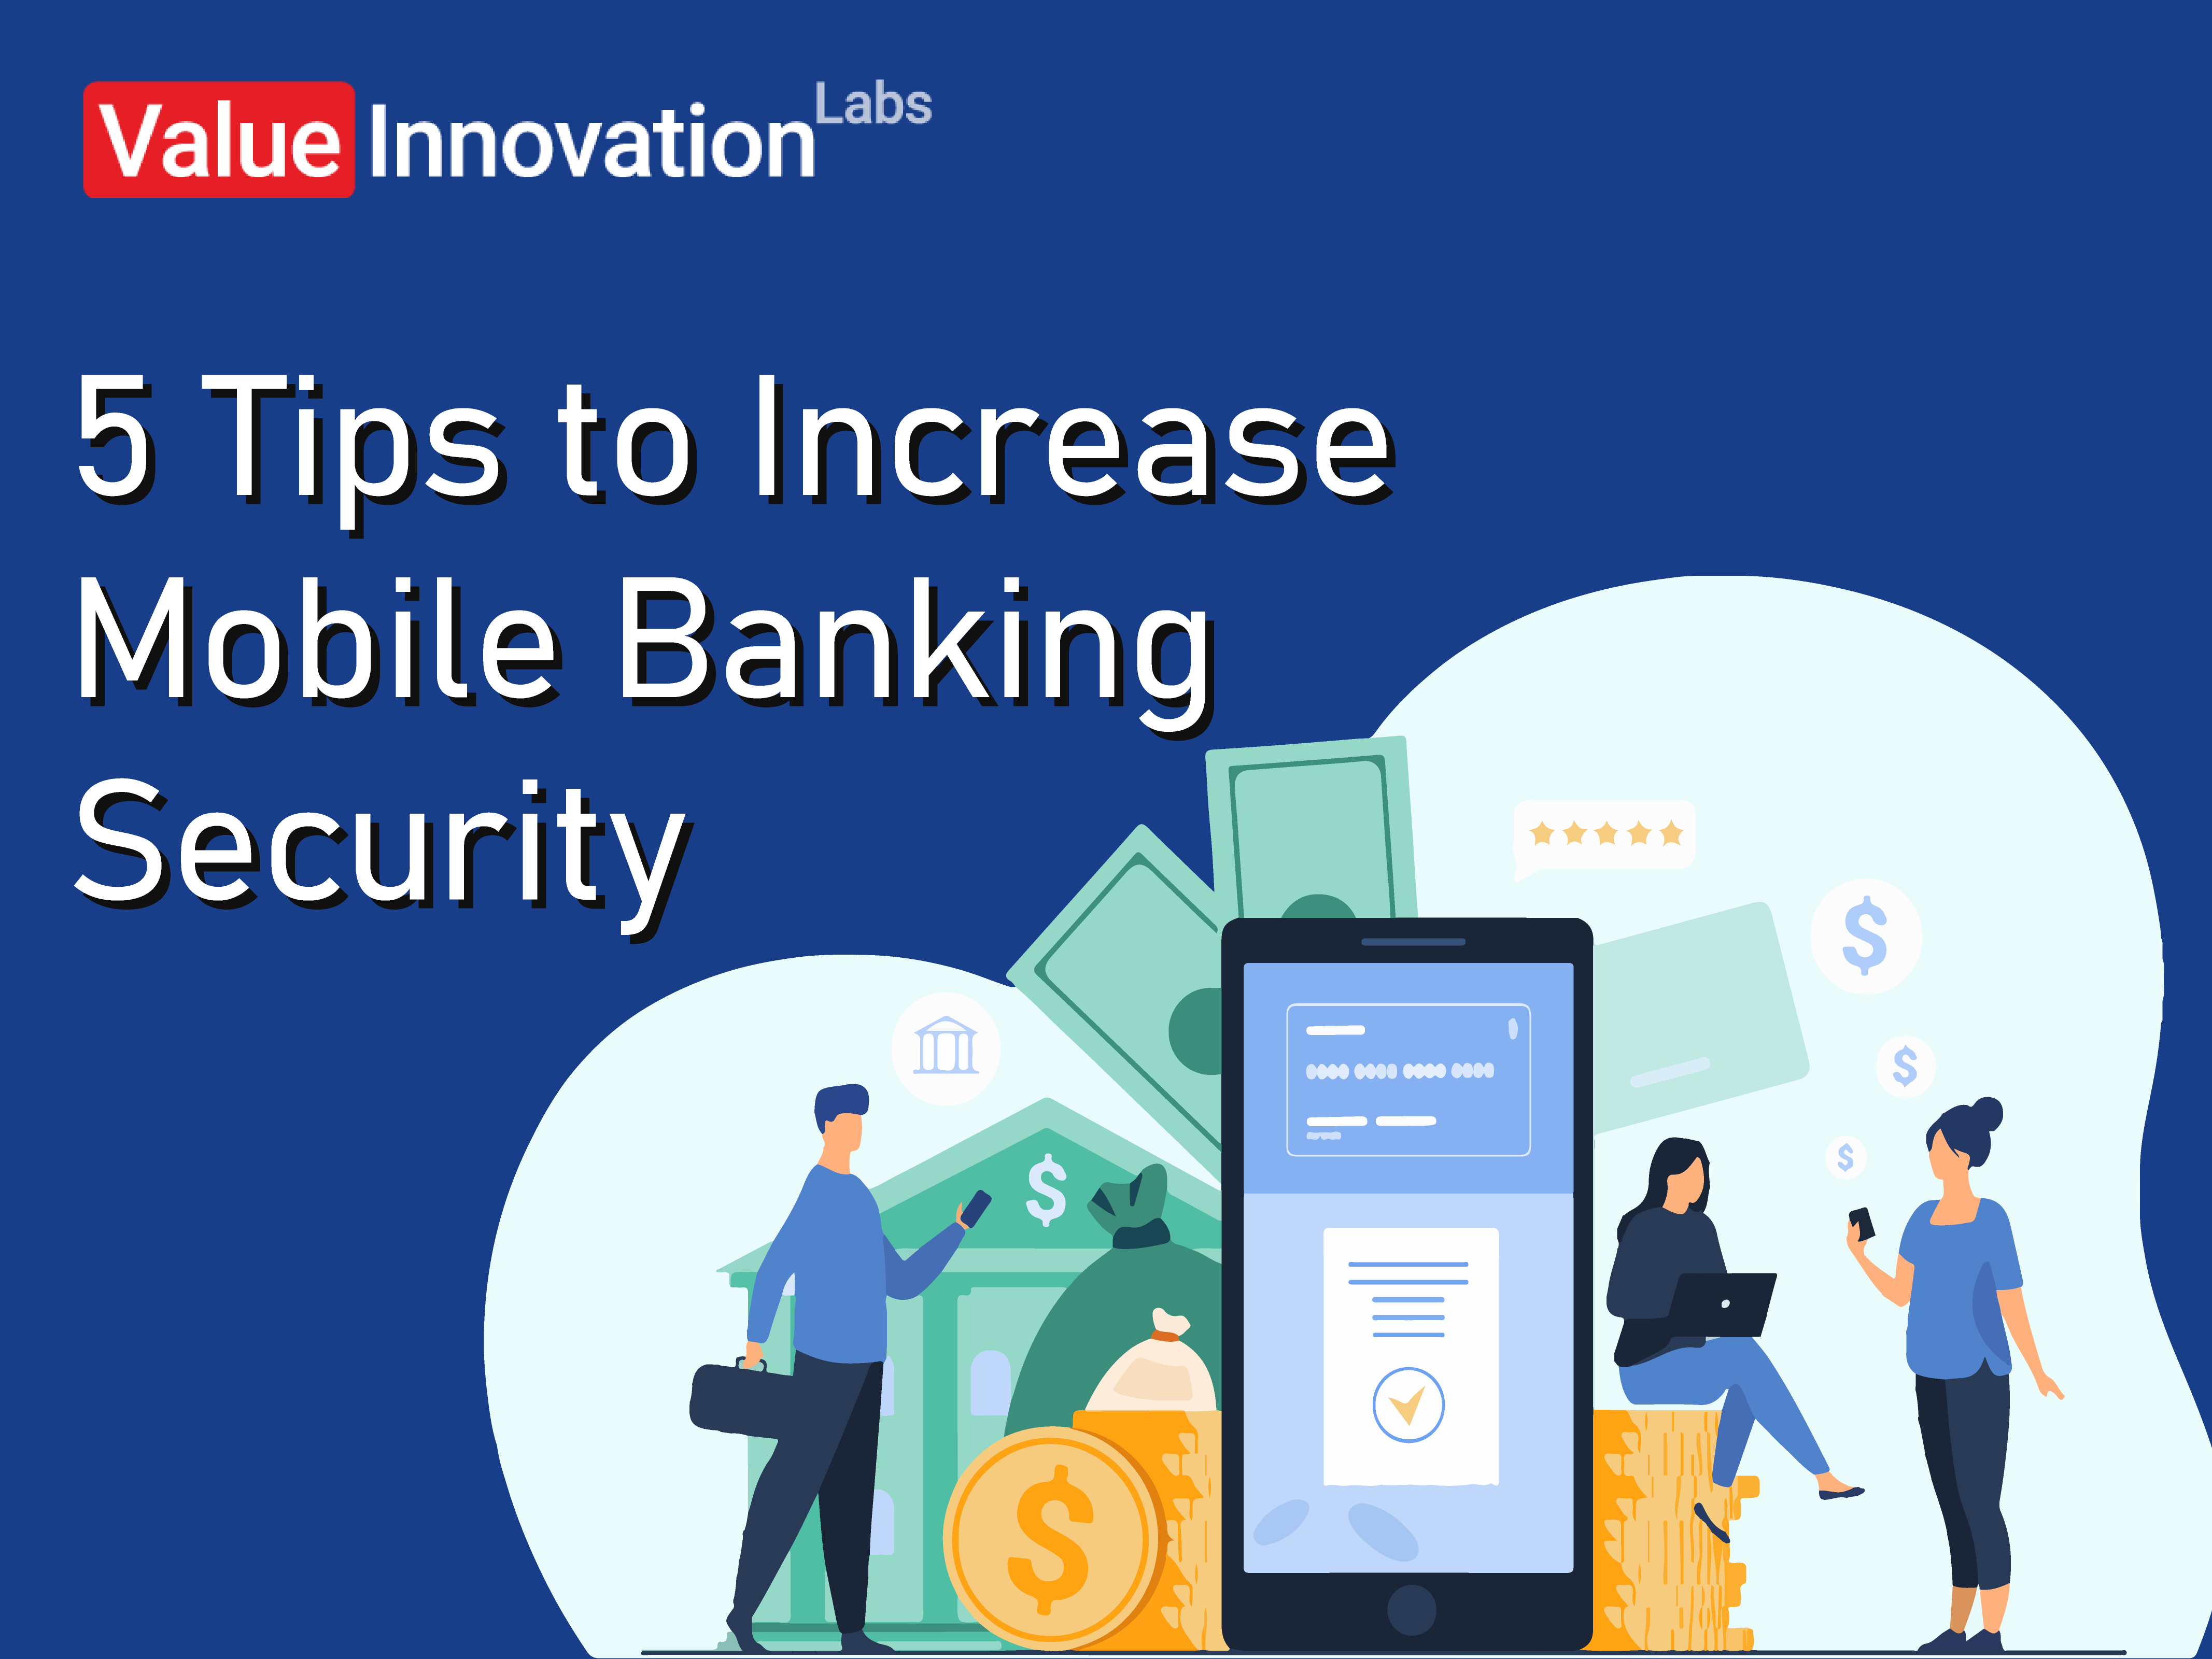 5 Tips to Increase Mobile Banking Security